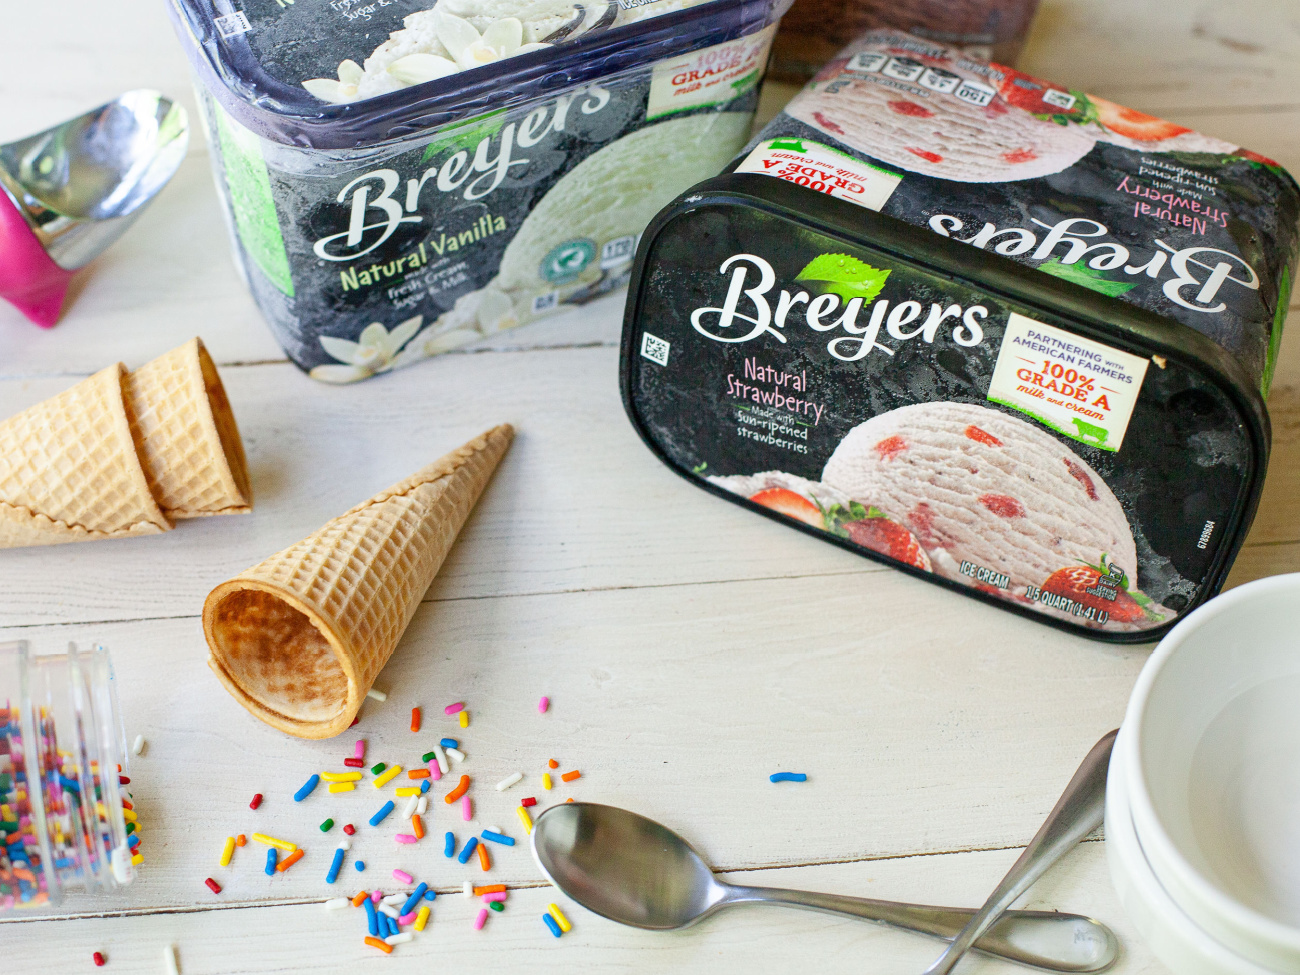 Chill Out On A Hot Day With Delicious Breyers Ice Cream - Save NOW At Publix on I Heart Publix 1